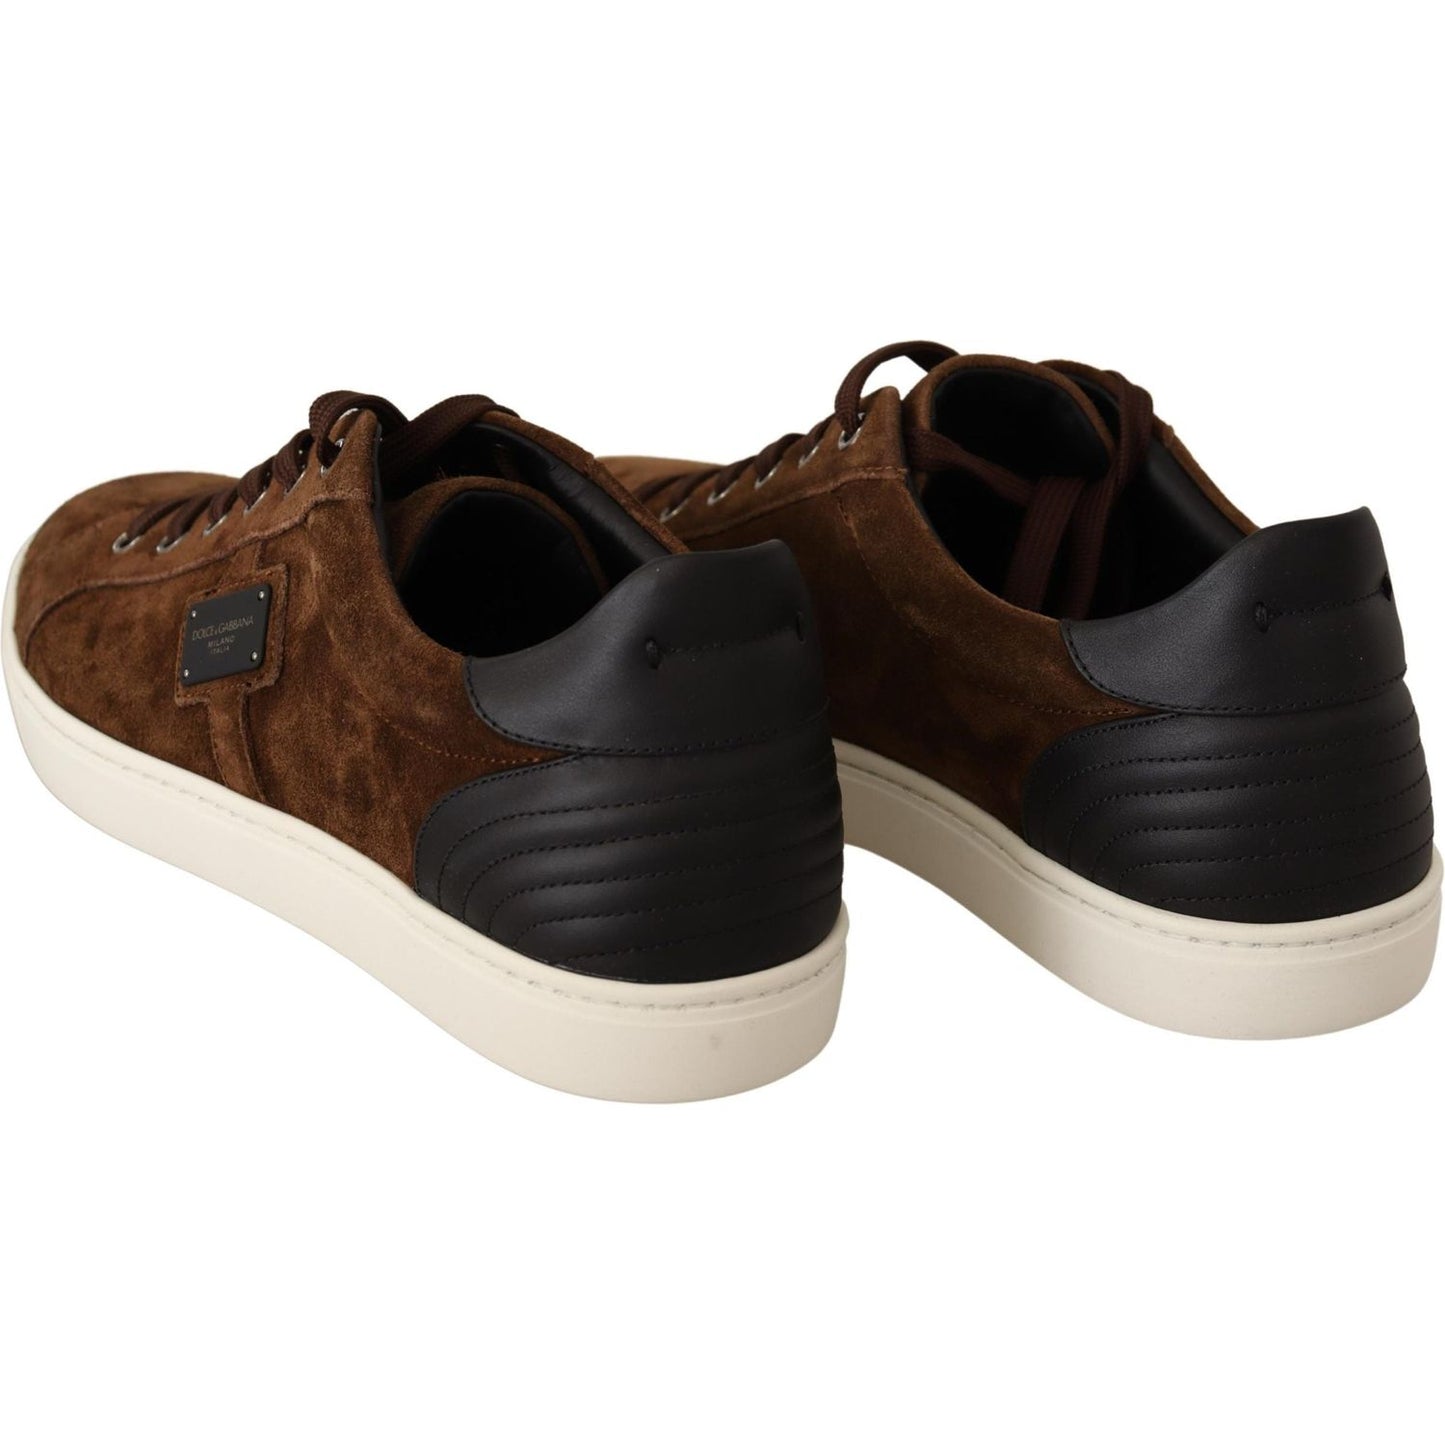 Dolce & Gabbana Elegant Leather Casual Sneakers in Brown brown-suede-leather-mens-low-tops-sneakers IMG_4821-scaled-43deb689-60a.jpg